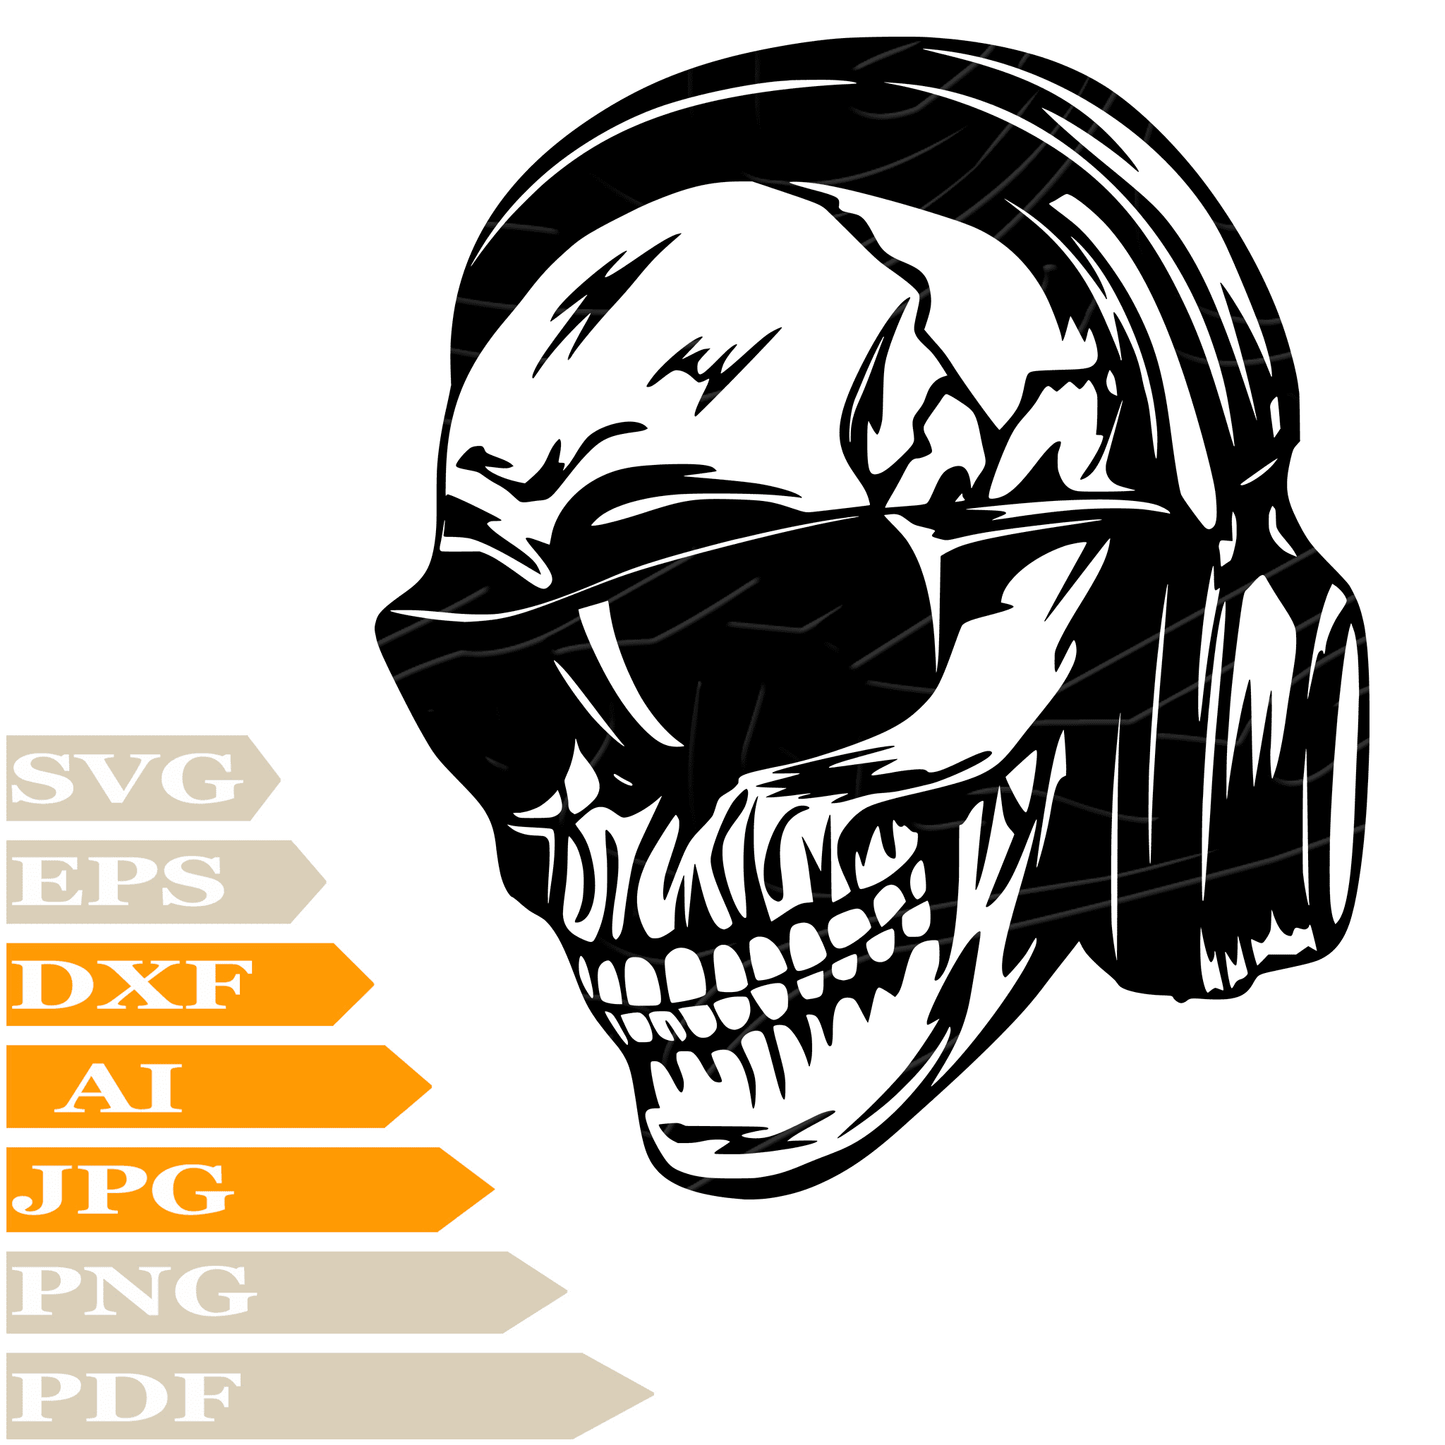 Skull With Sunglasses SVG File, Skull  With Headphones SVG Design, Human Skull Digital Vector, Skull PNG, PDF, DXF, For Cricut, Clipart, Cut File, Instant Download, T-Shirt, For Tattoo, Silhouette